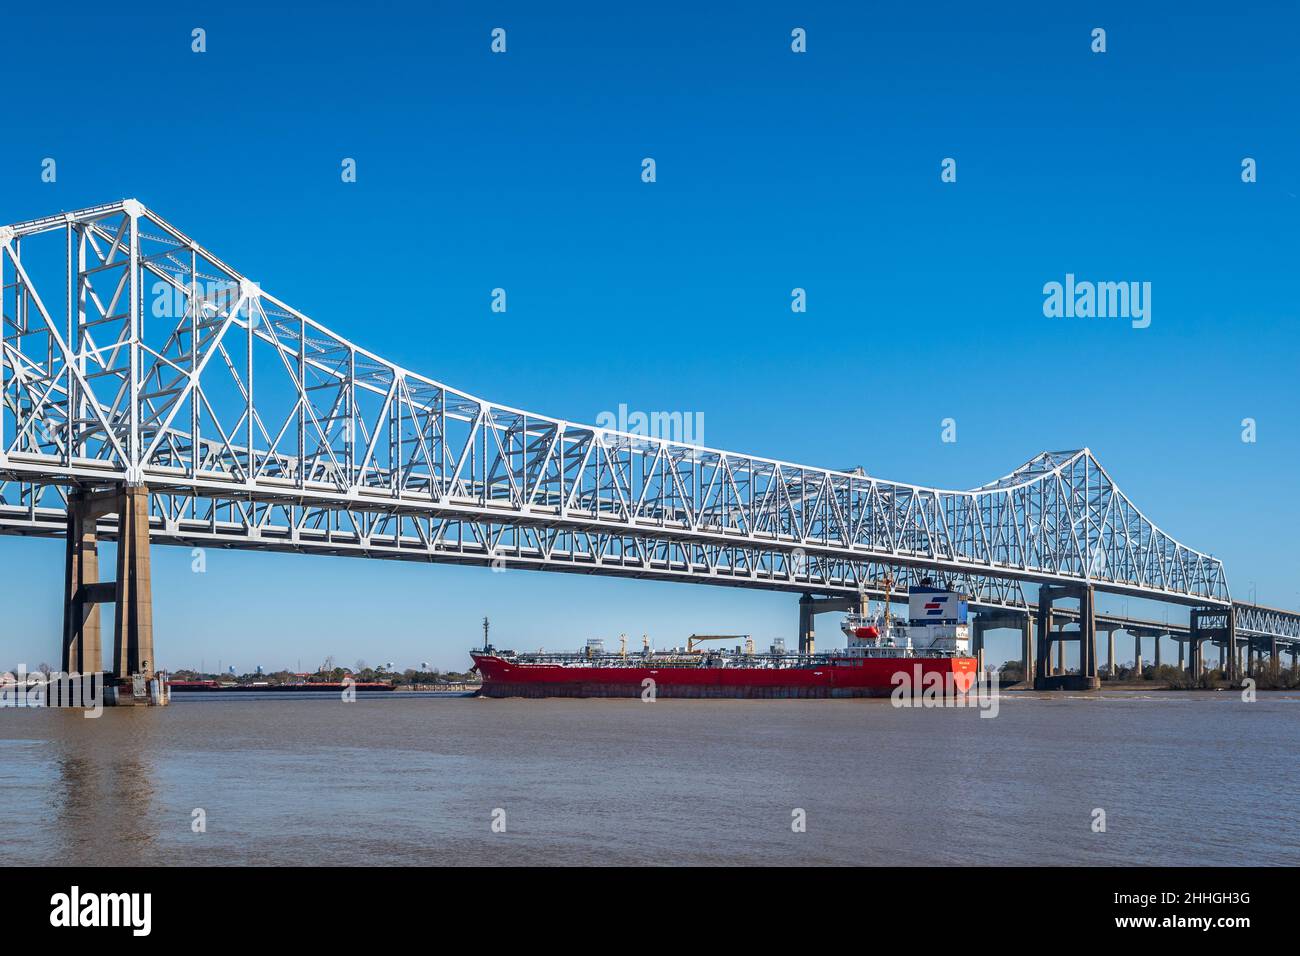 Port of New Orleans on the Mississippi River with a boat, ship, barge, passing under the Mississippi River Bridge, Louisiana, USA. Stock Photo